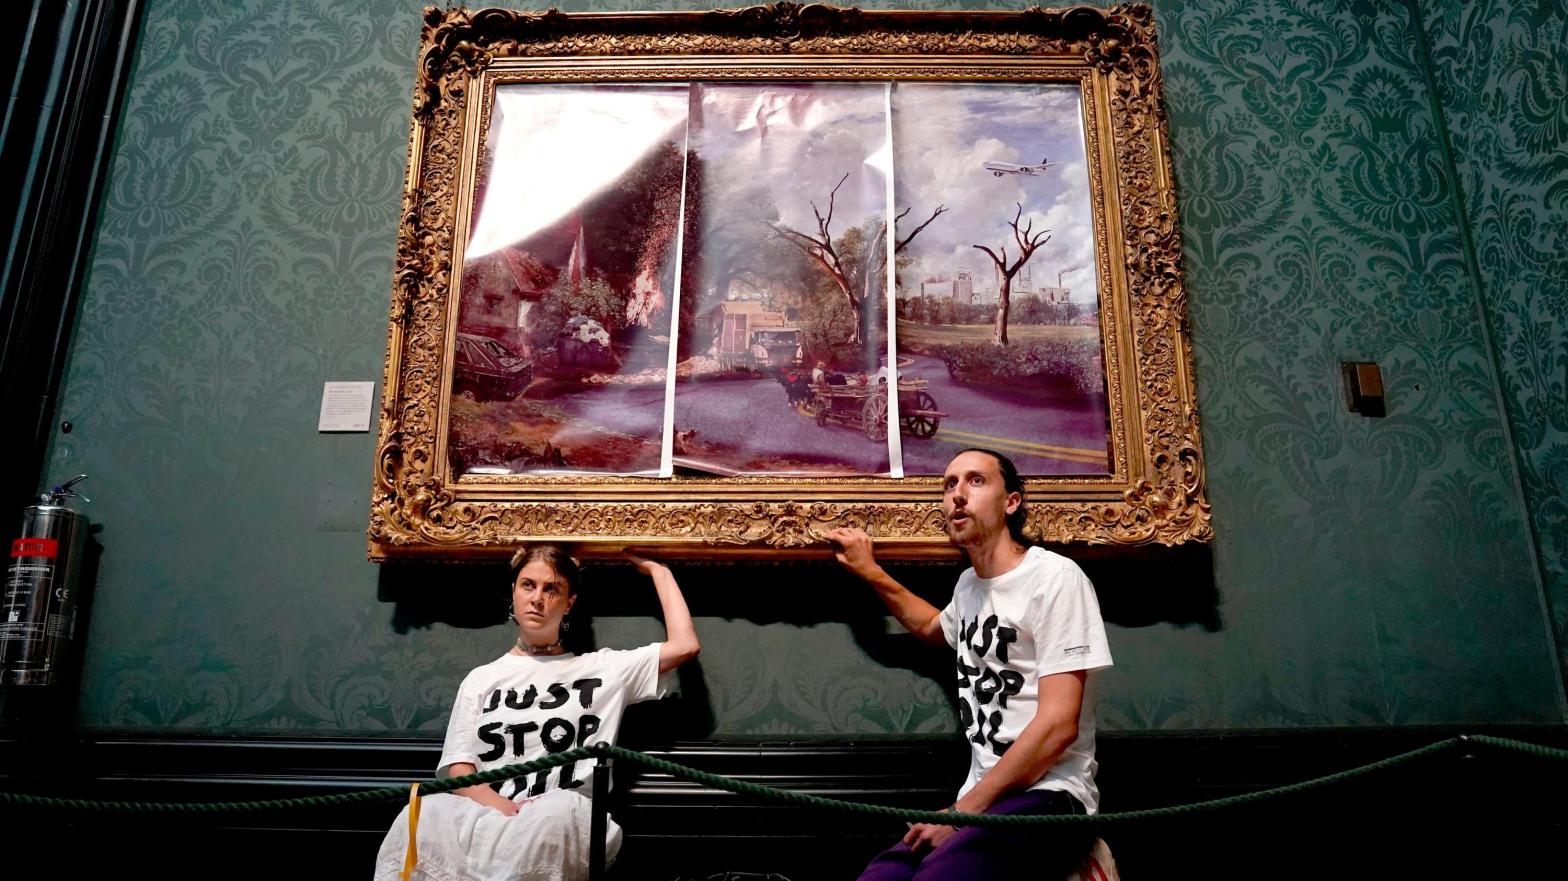 Protesters from Just Stop Oil climate protest group glue their hands to the frame of John Constable's The Hay Wain after first having covered the painting with their own picture at the National Gallery, London, on December 20, 2022.  (Photo: Press Association, AP)